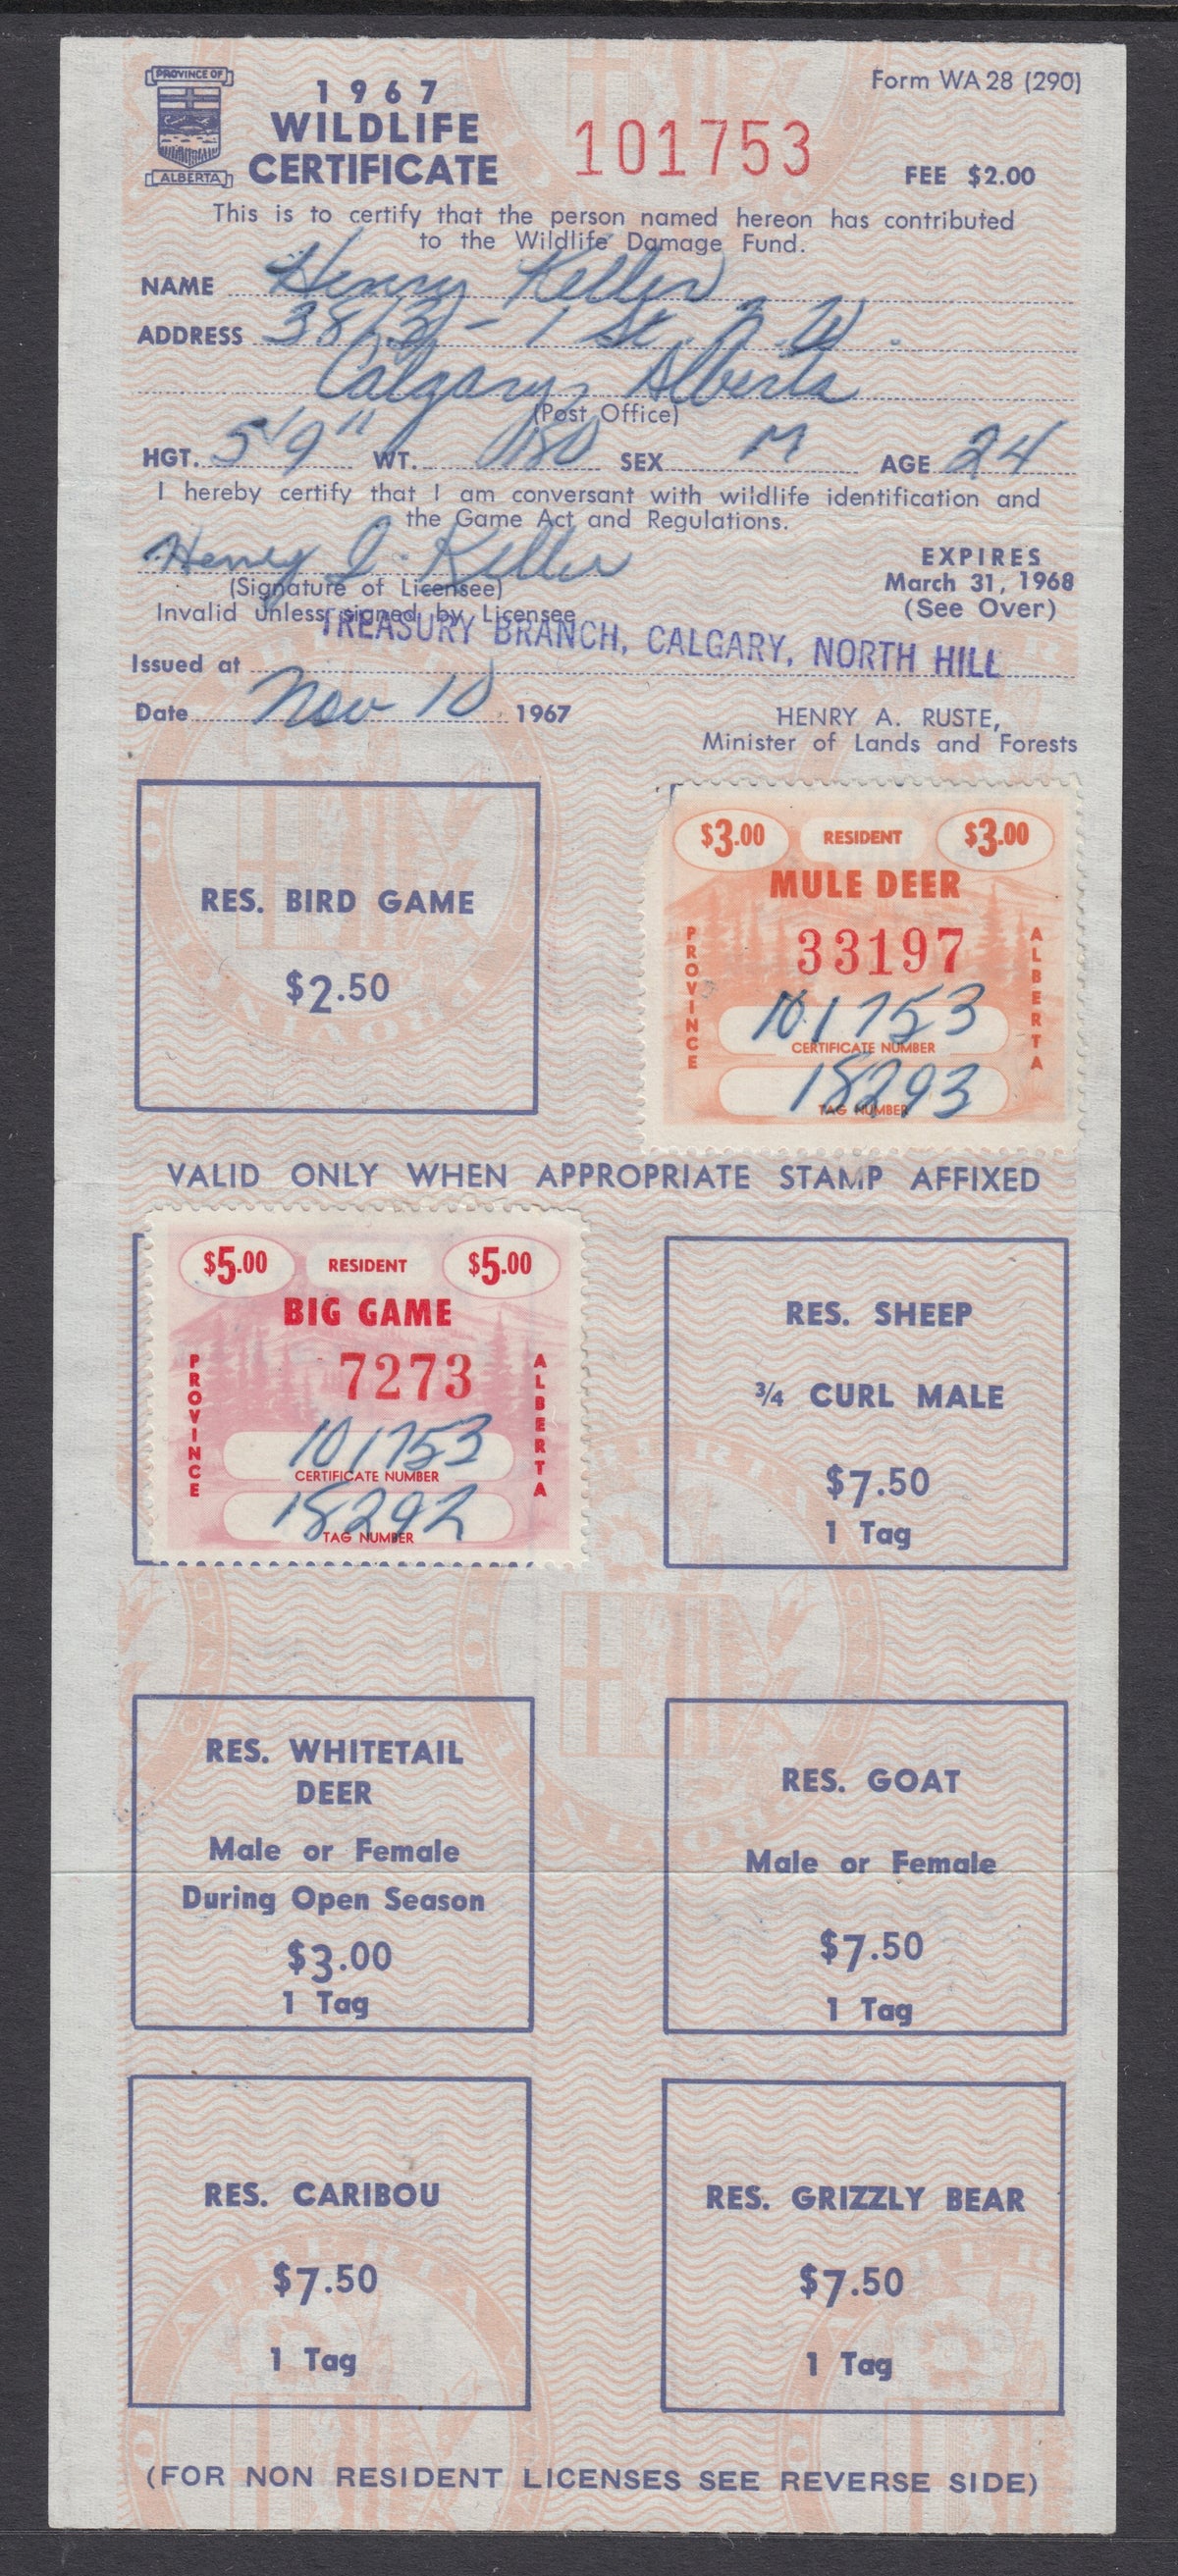 0388AW2111 - AW46, 49 - Used on License